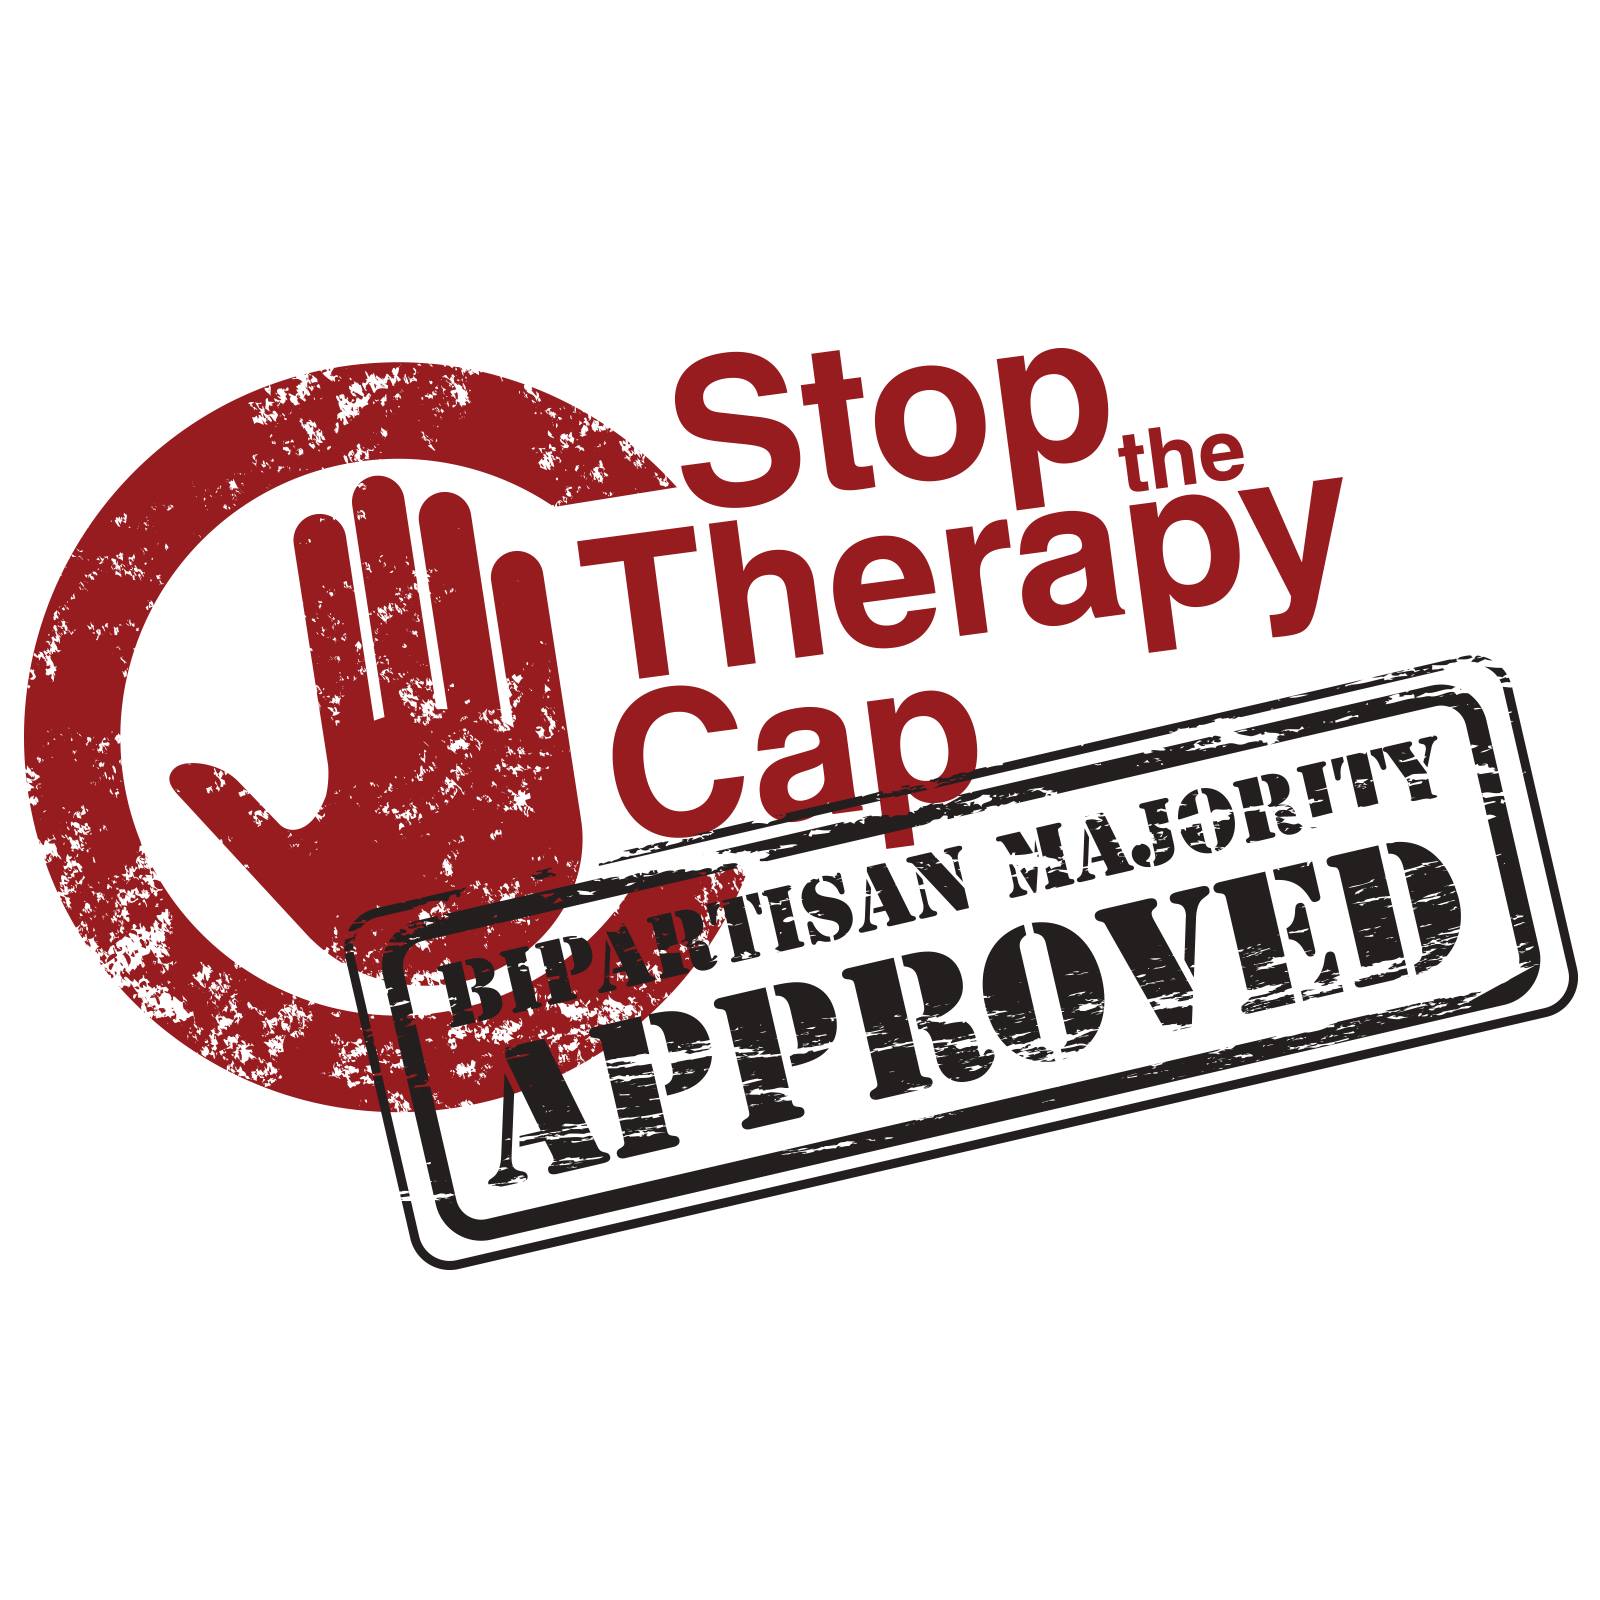 Huge O Logo - The Therapy Center | HUGE milestone in therapy cap repeal